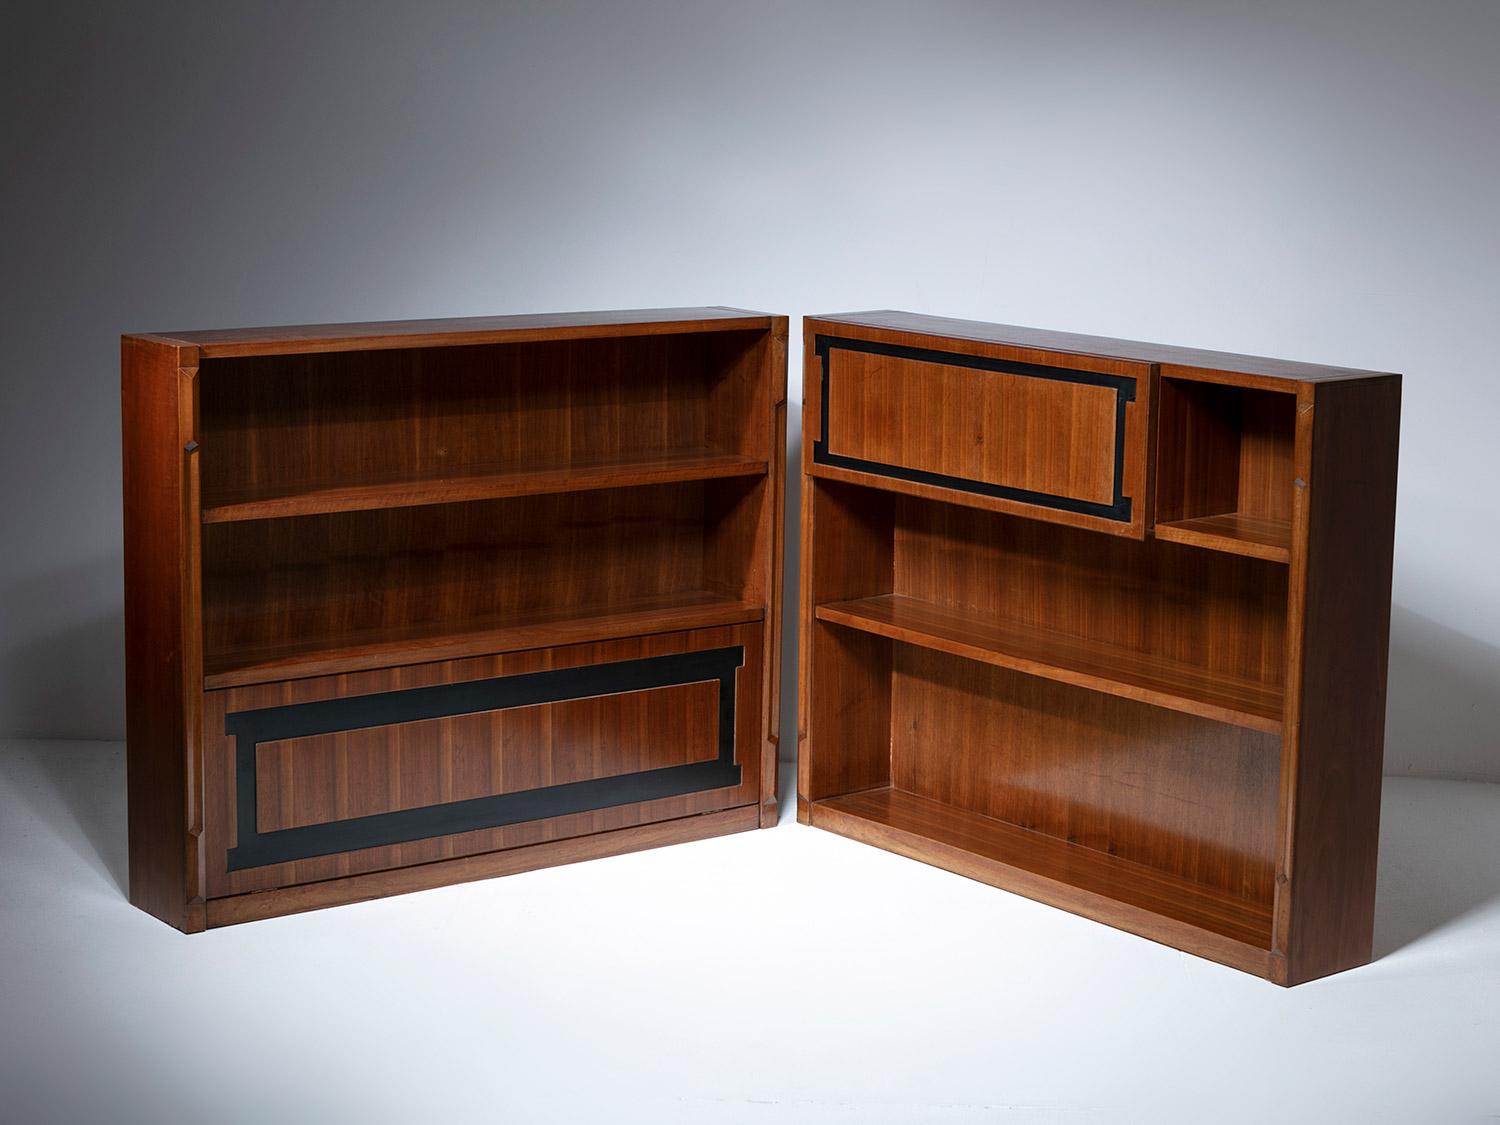 Pair of walnut storage pieces with shelves and two fall doors.
The pieces can be combined in different positions.